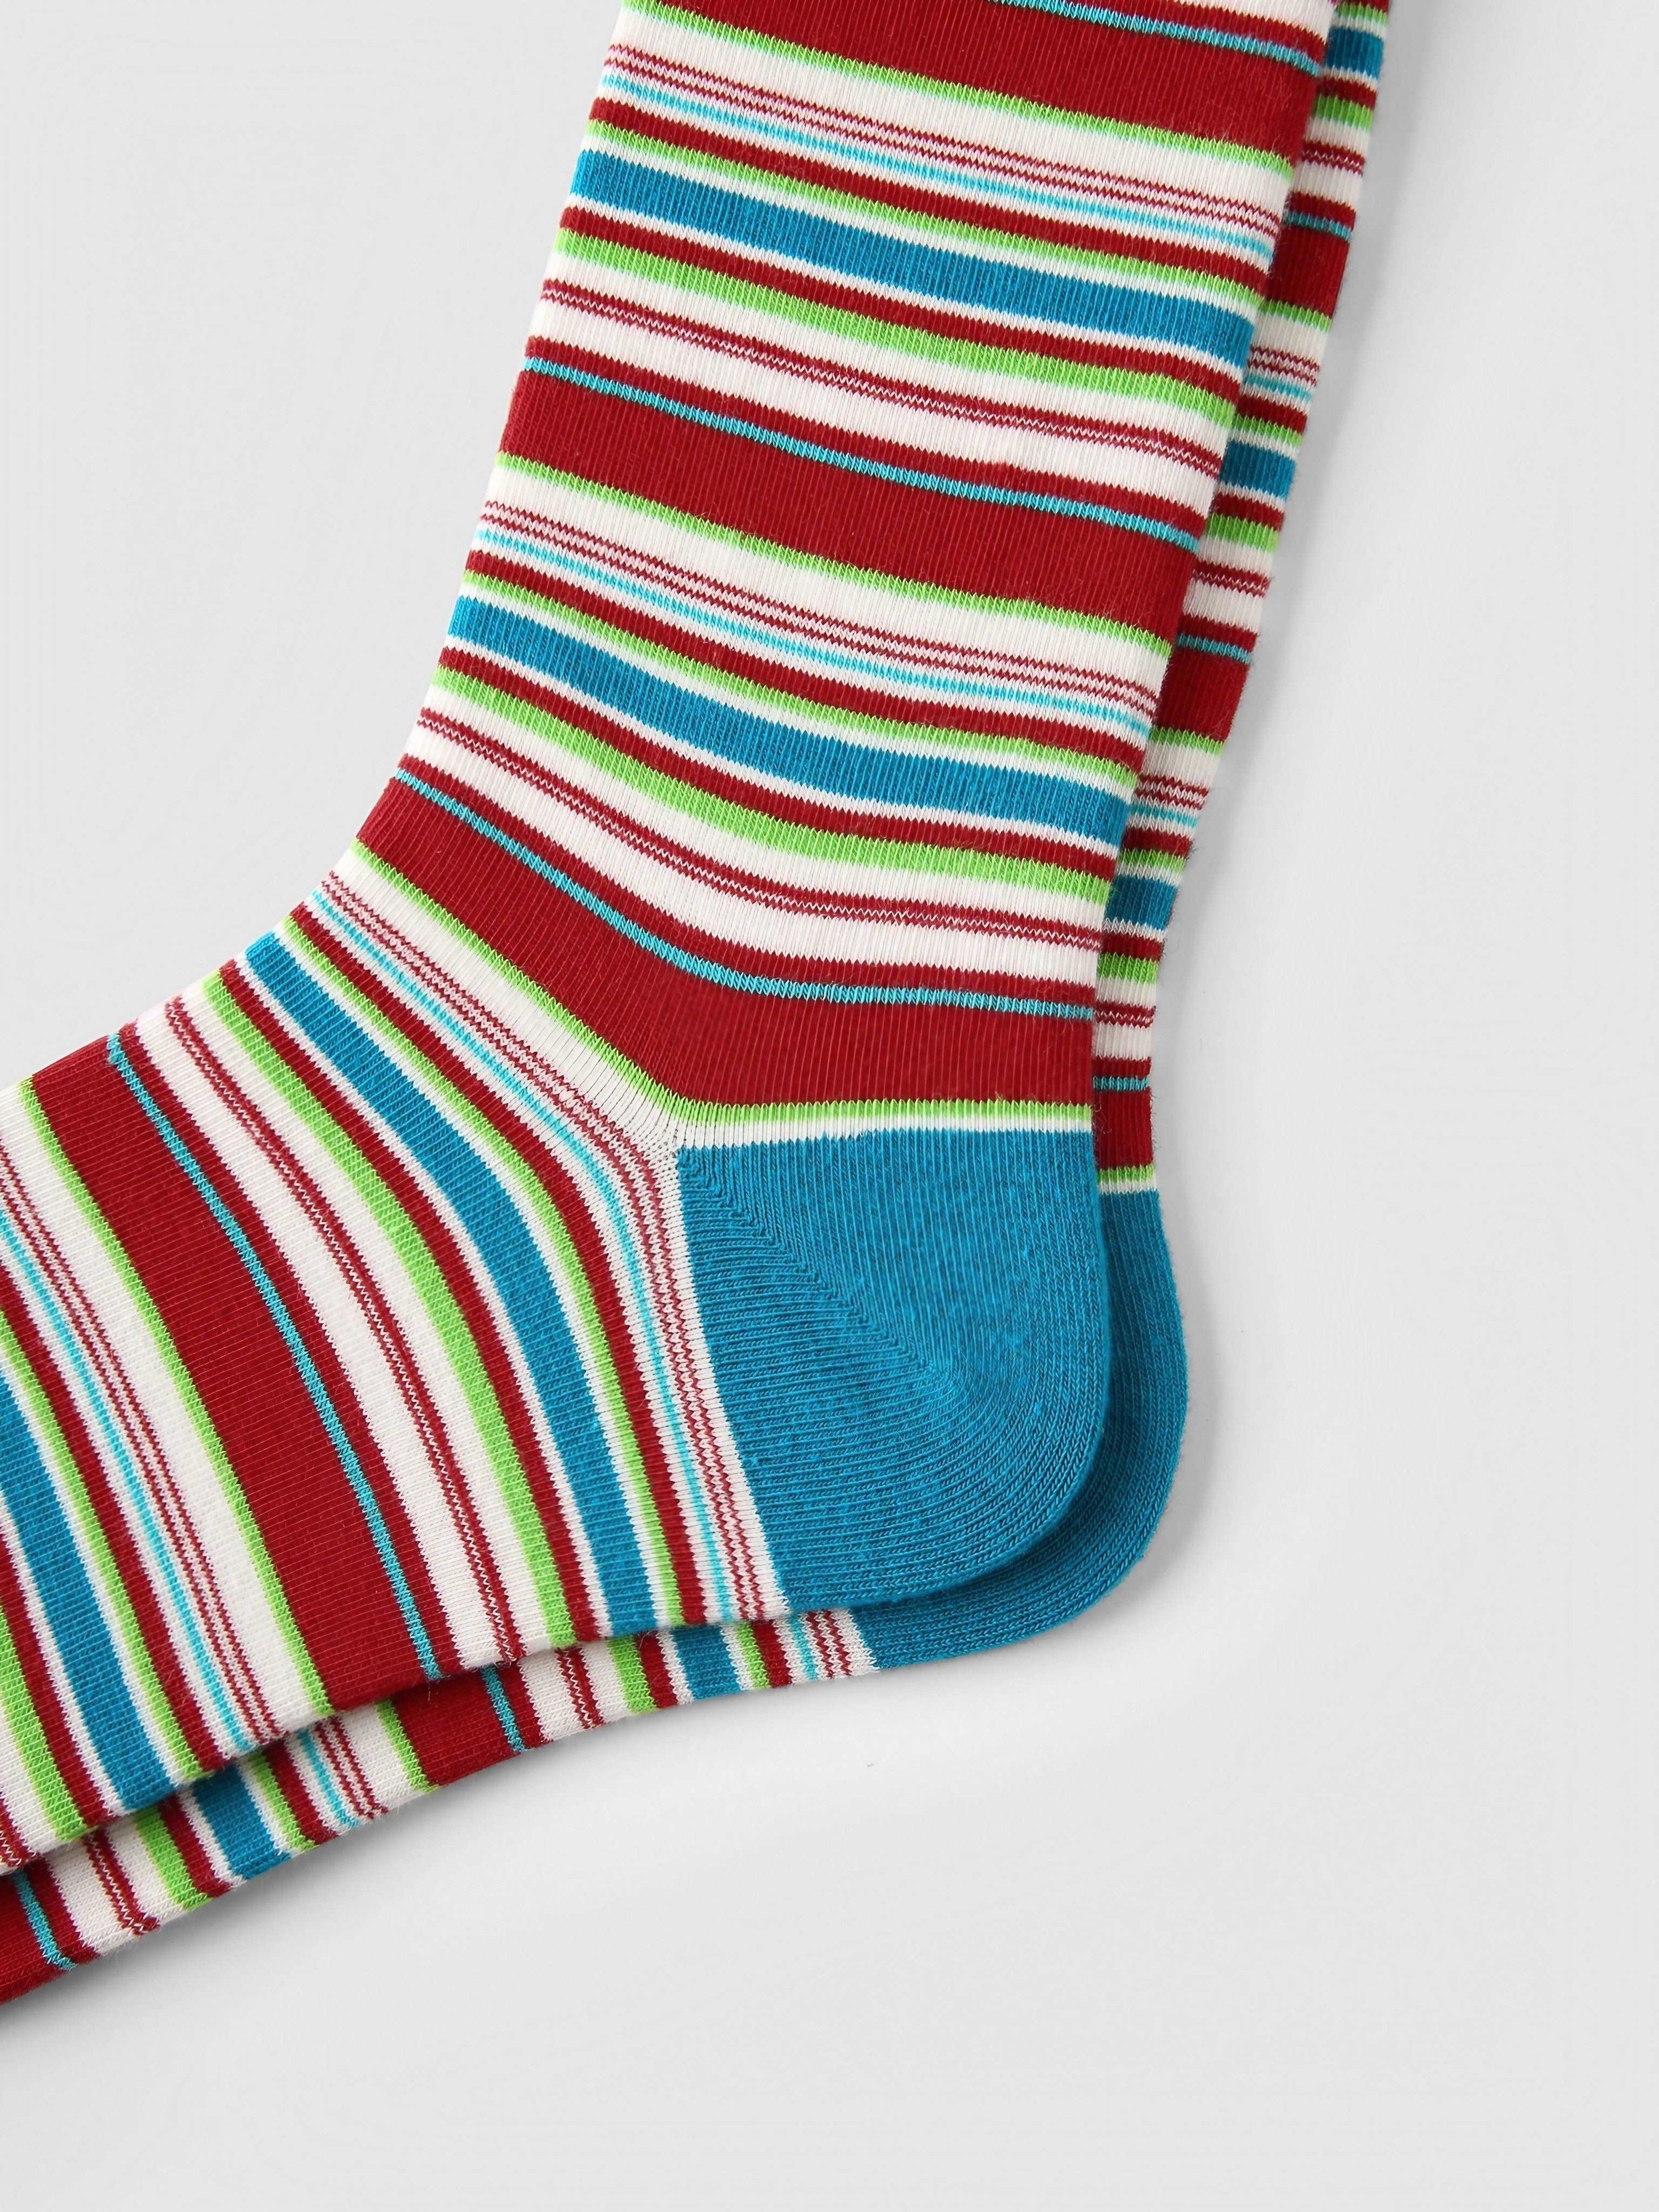 Another stylish pair of Blackpink Funky Socks with a vibrant multicolored stripe motif